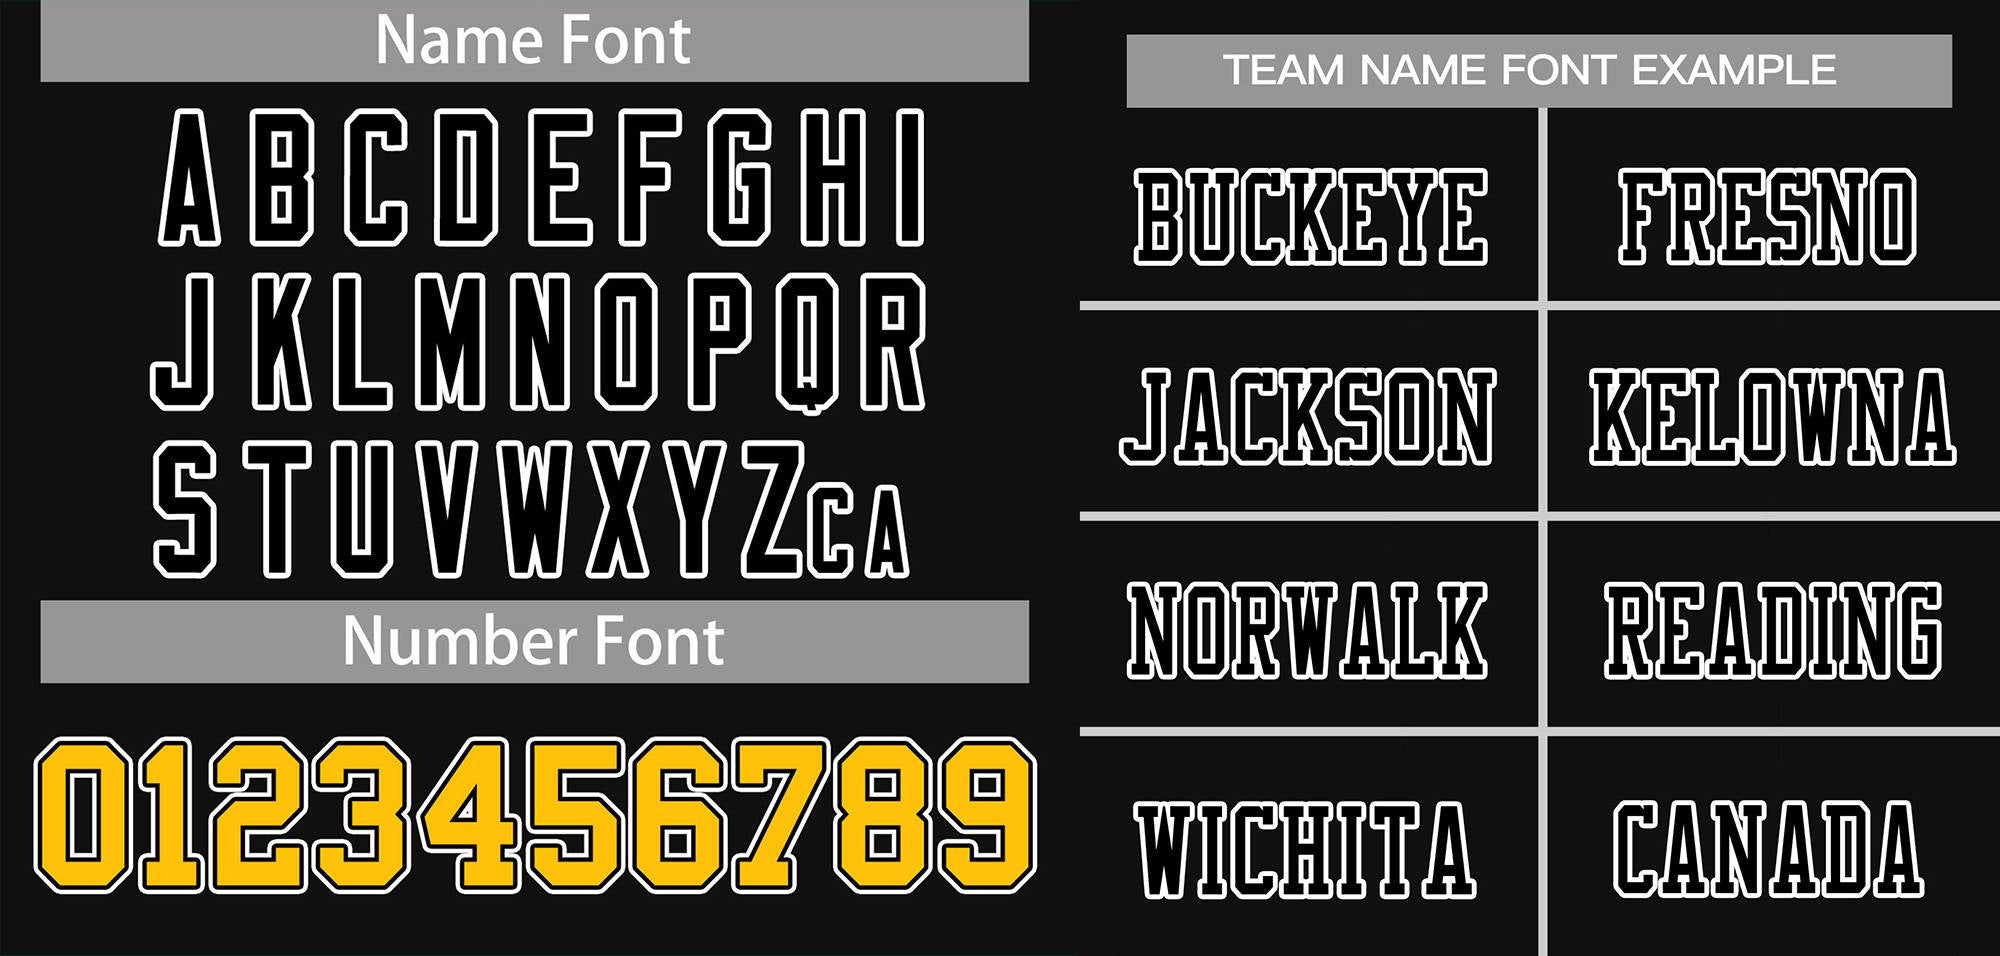 football black jersey name font example